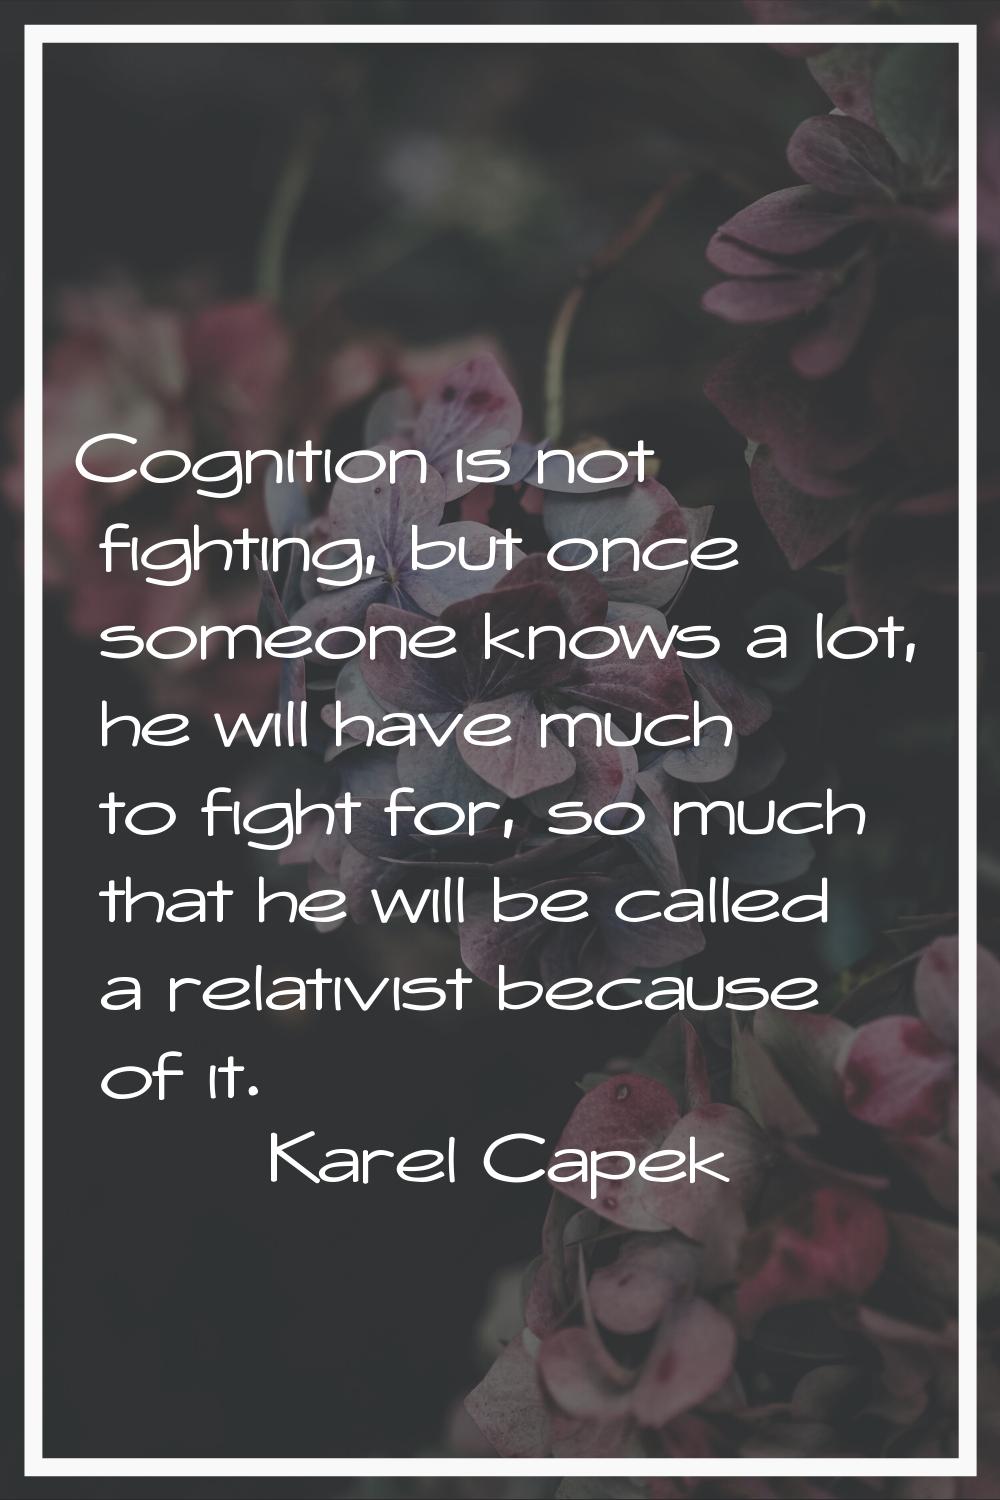 Cognition is not fighting, but once someone knows a lot, he will have much to fight for, so much th